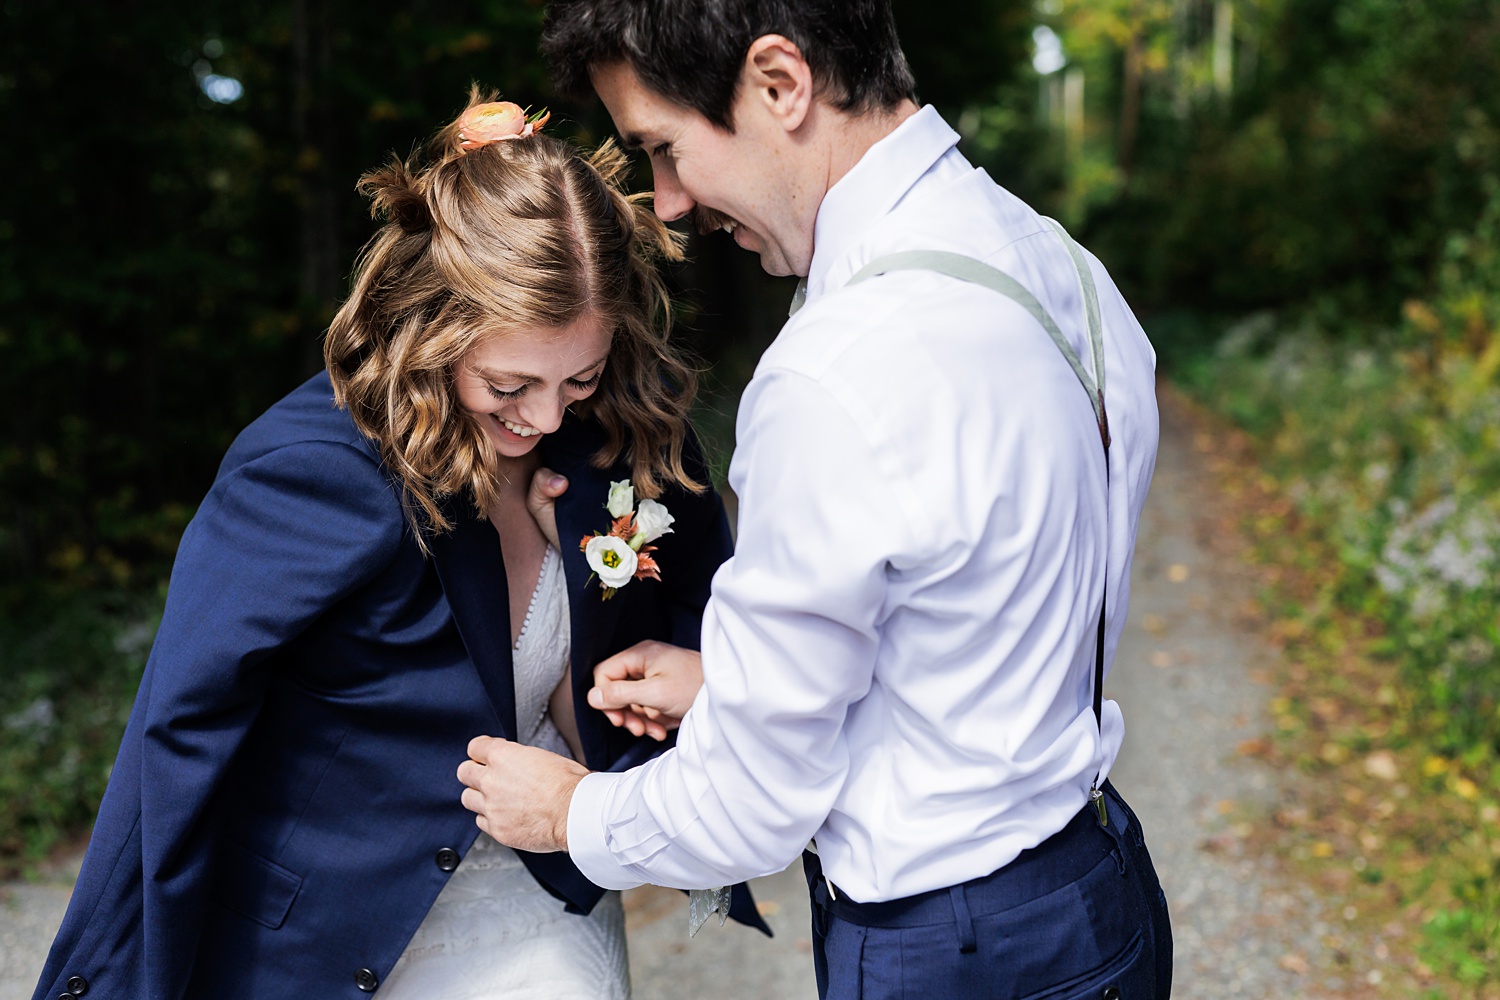 The groom wraps the bride up in his suit coat on the chilly fall day